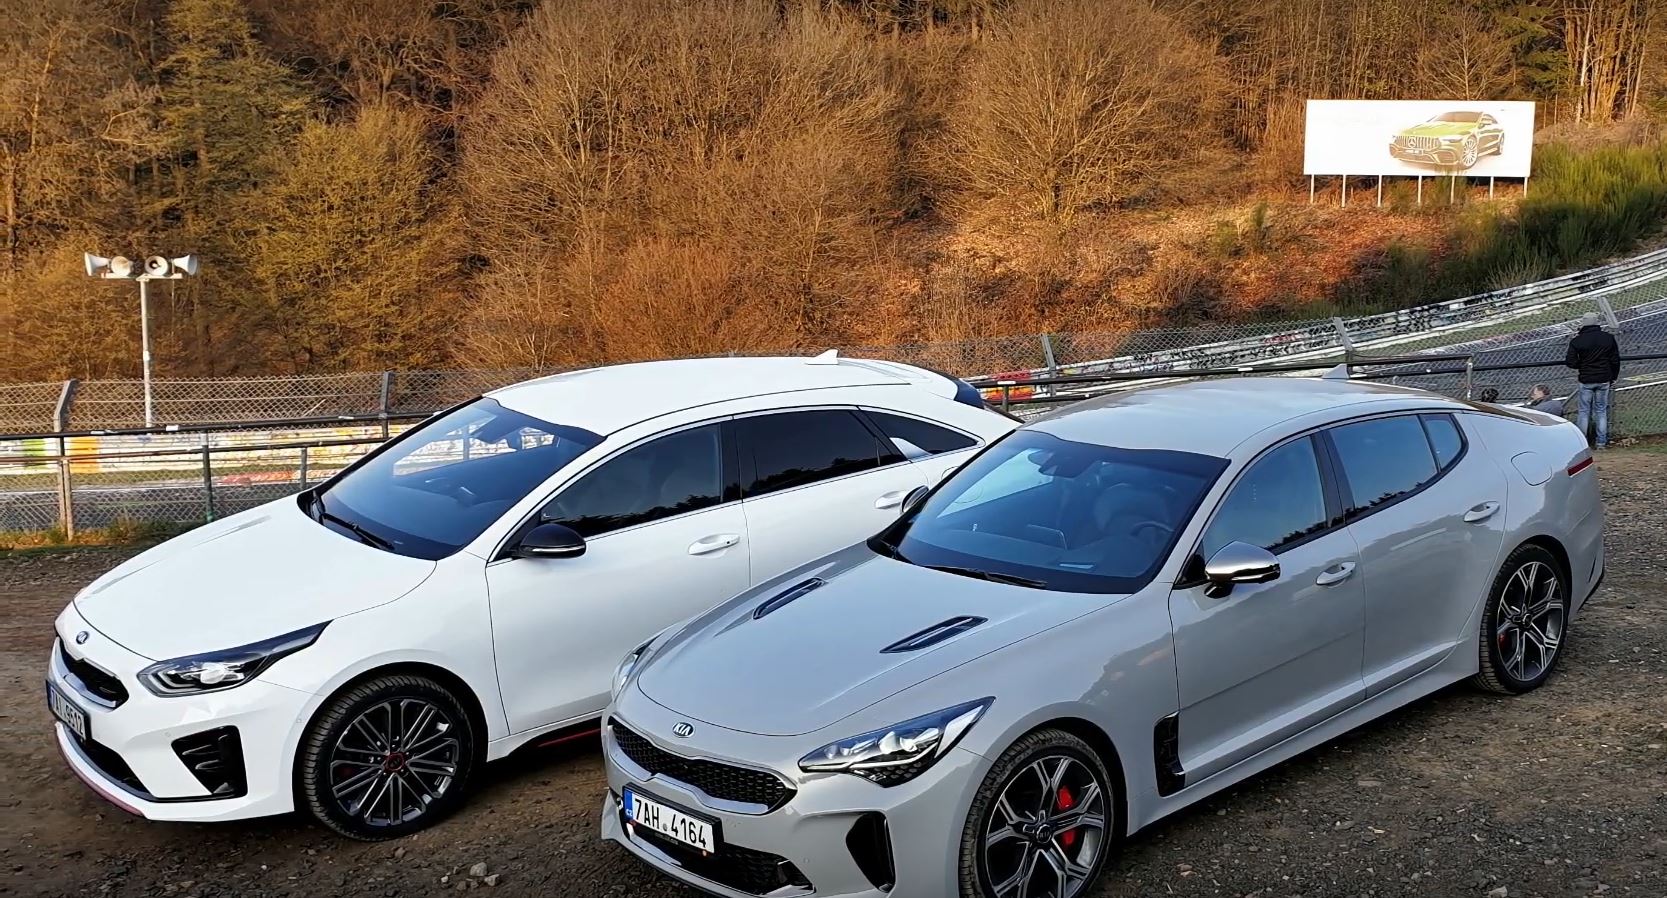 https://s1.cdn.autoevolution.com/images/news/kia-proceed-gt-takes-to-the-nurburgring-gets-chased-by-stinger-gt-136322_1.jpg